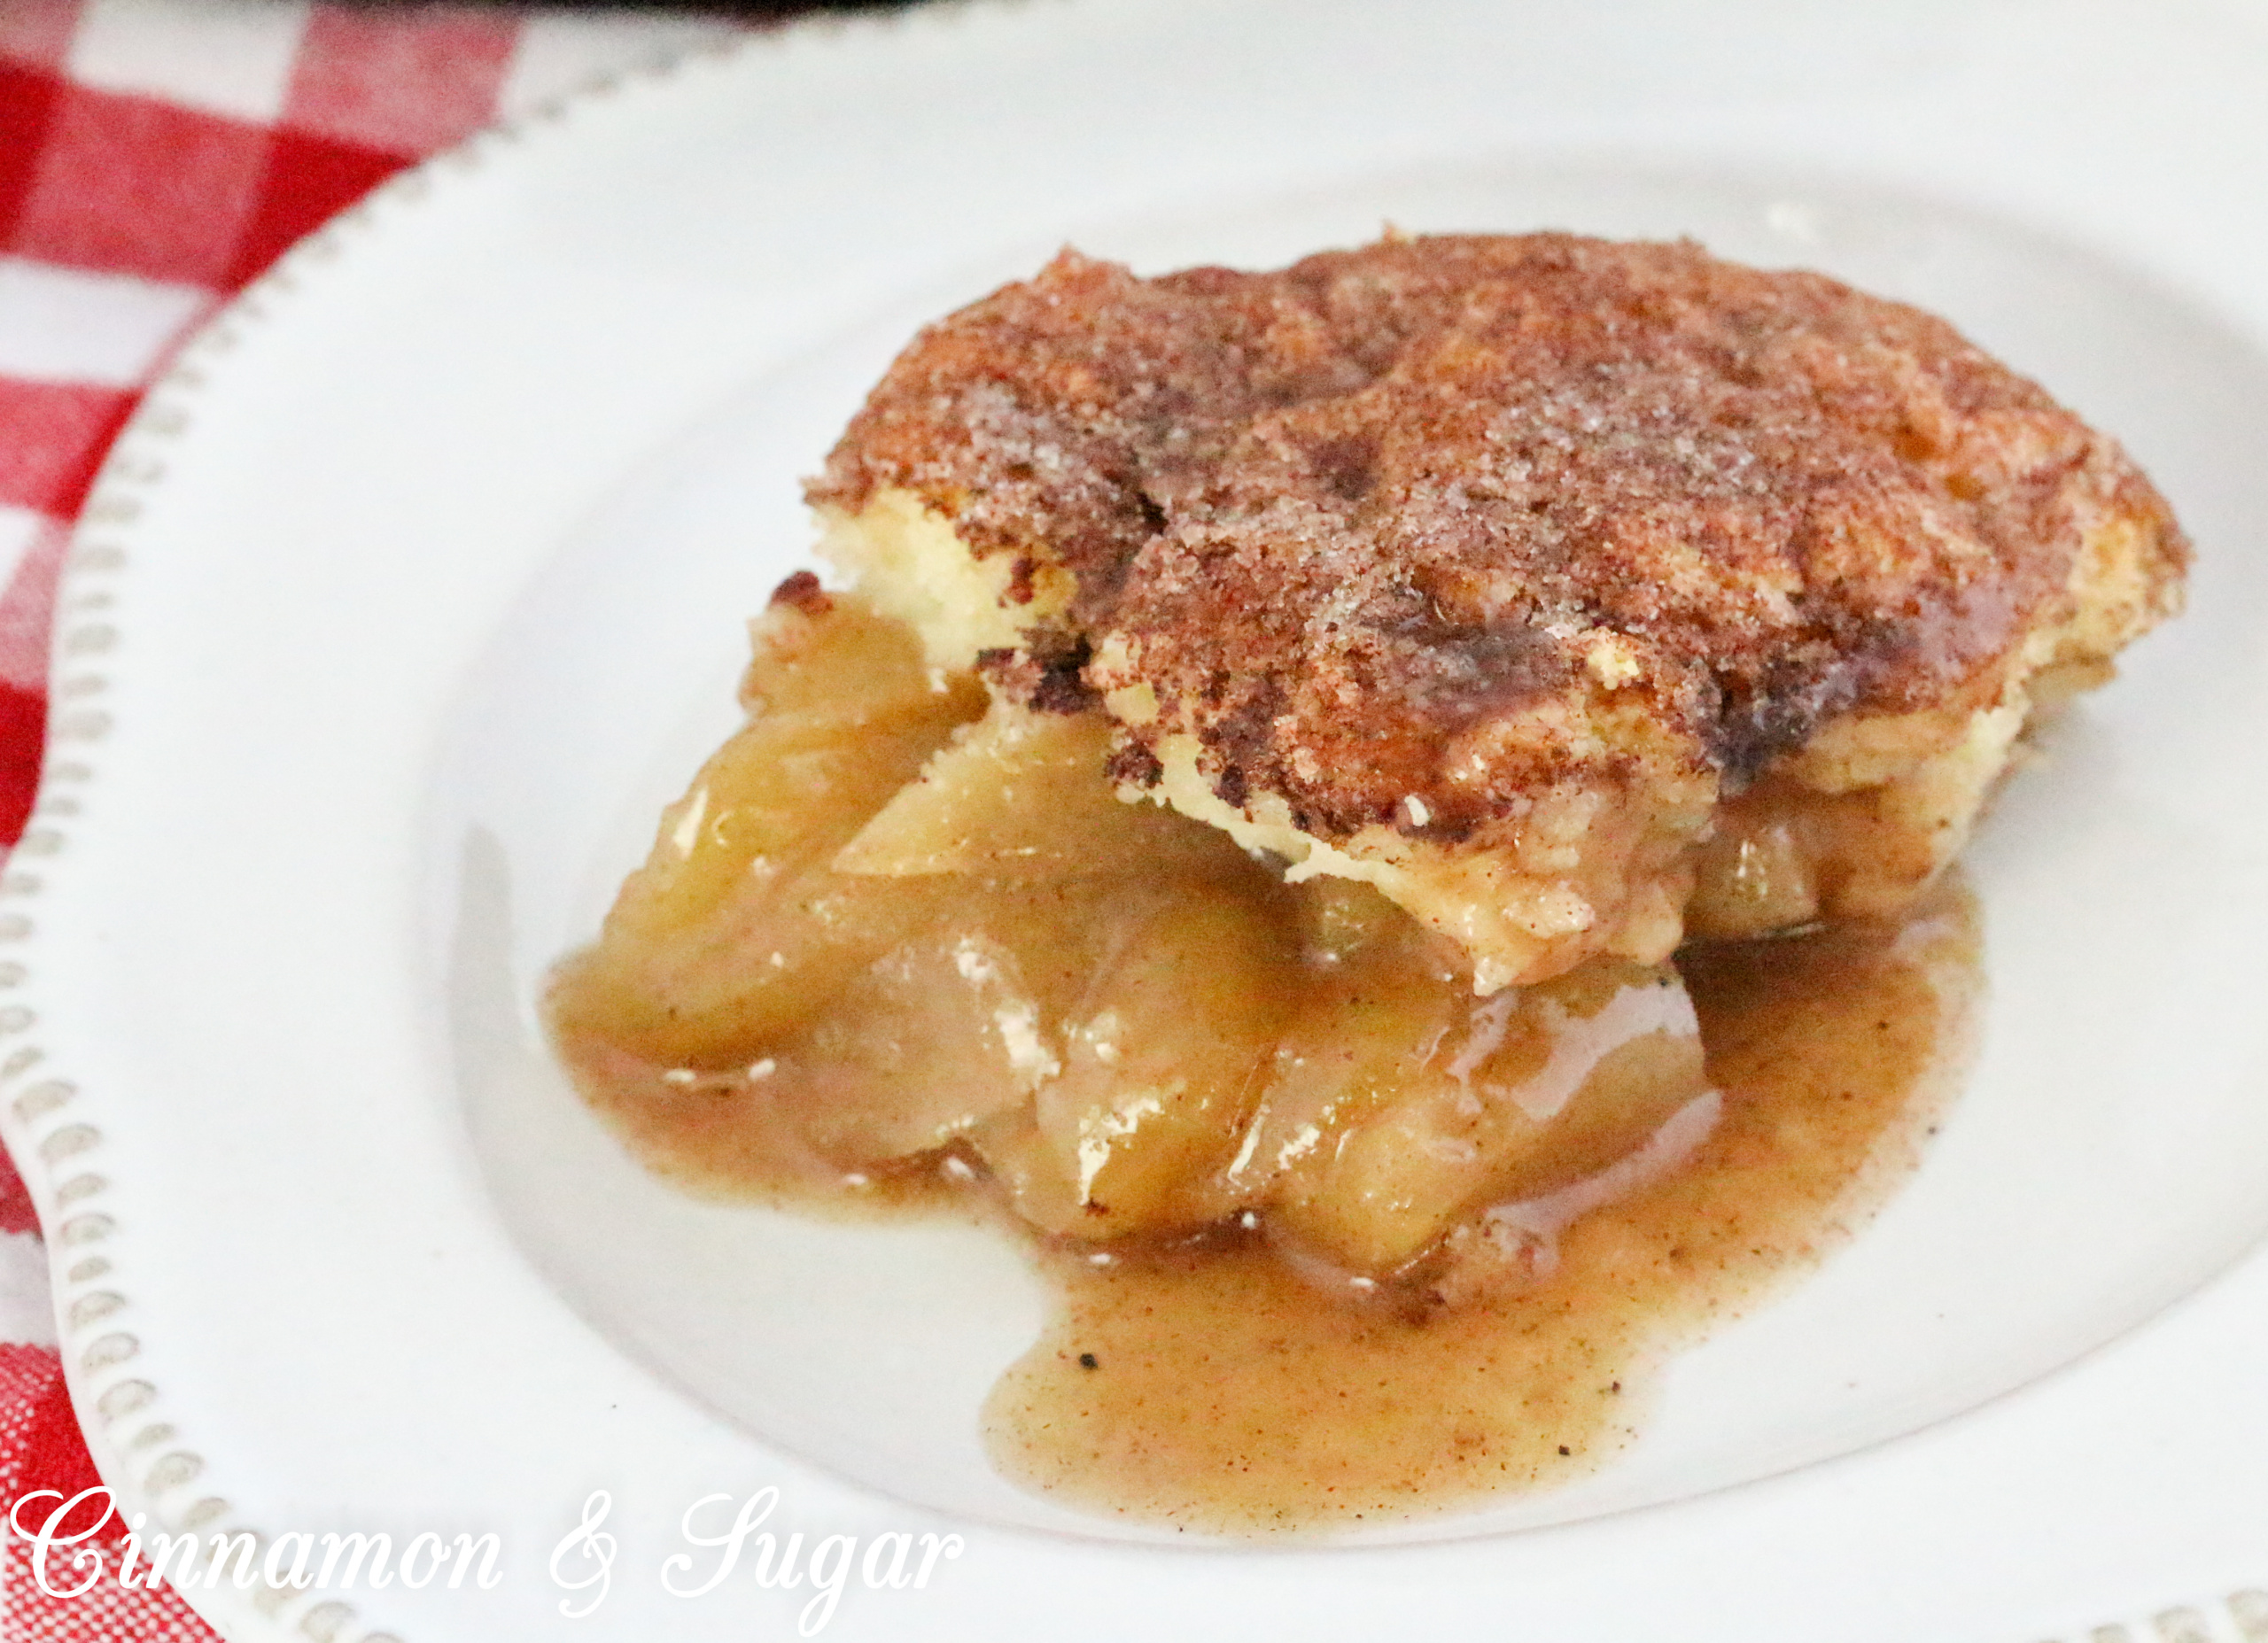 While rustic, Dutch Apple Cobbler in a Cast-Iron Skillet is scrumptiously delicious from the cinnamon-y tender apples to the buttery cinnamon sugar crunch coating the rich, biscuit-like topping. Recipe shared with permission granted by Cheryl Hollon, author of STILL KNIFE PAINTING.